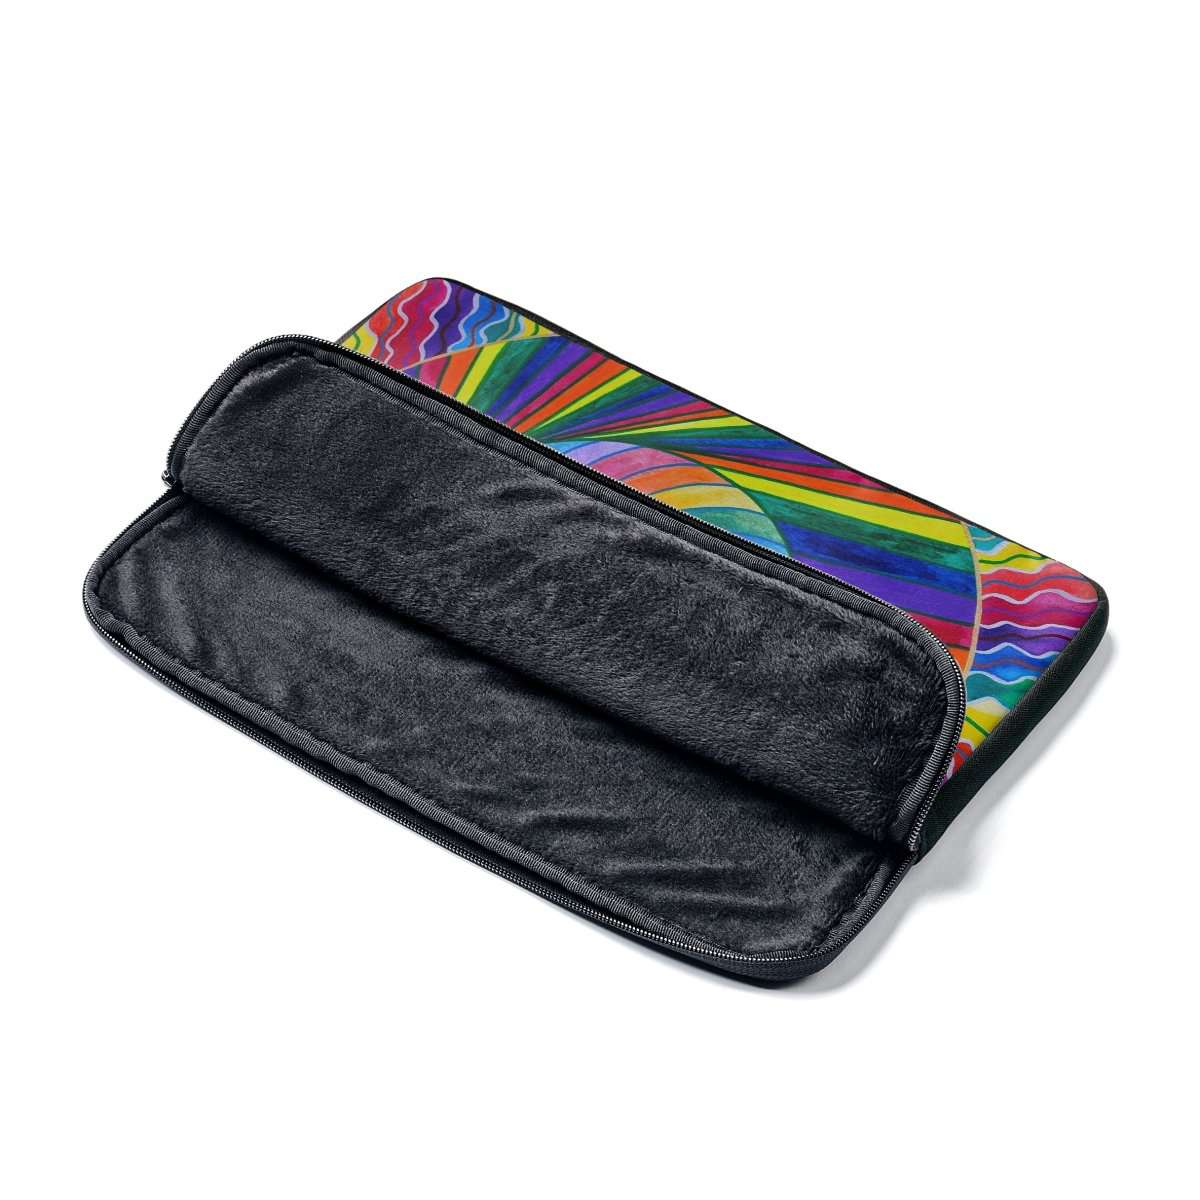 get-the-official-emerge-laptop-sleeve-discount_2.jpg